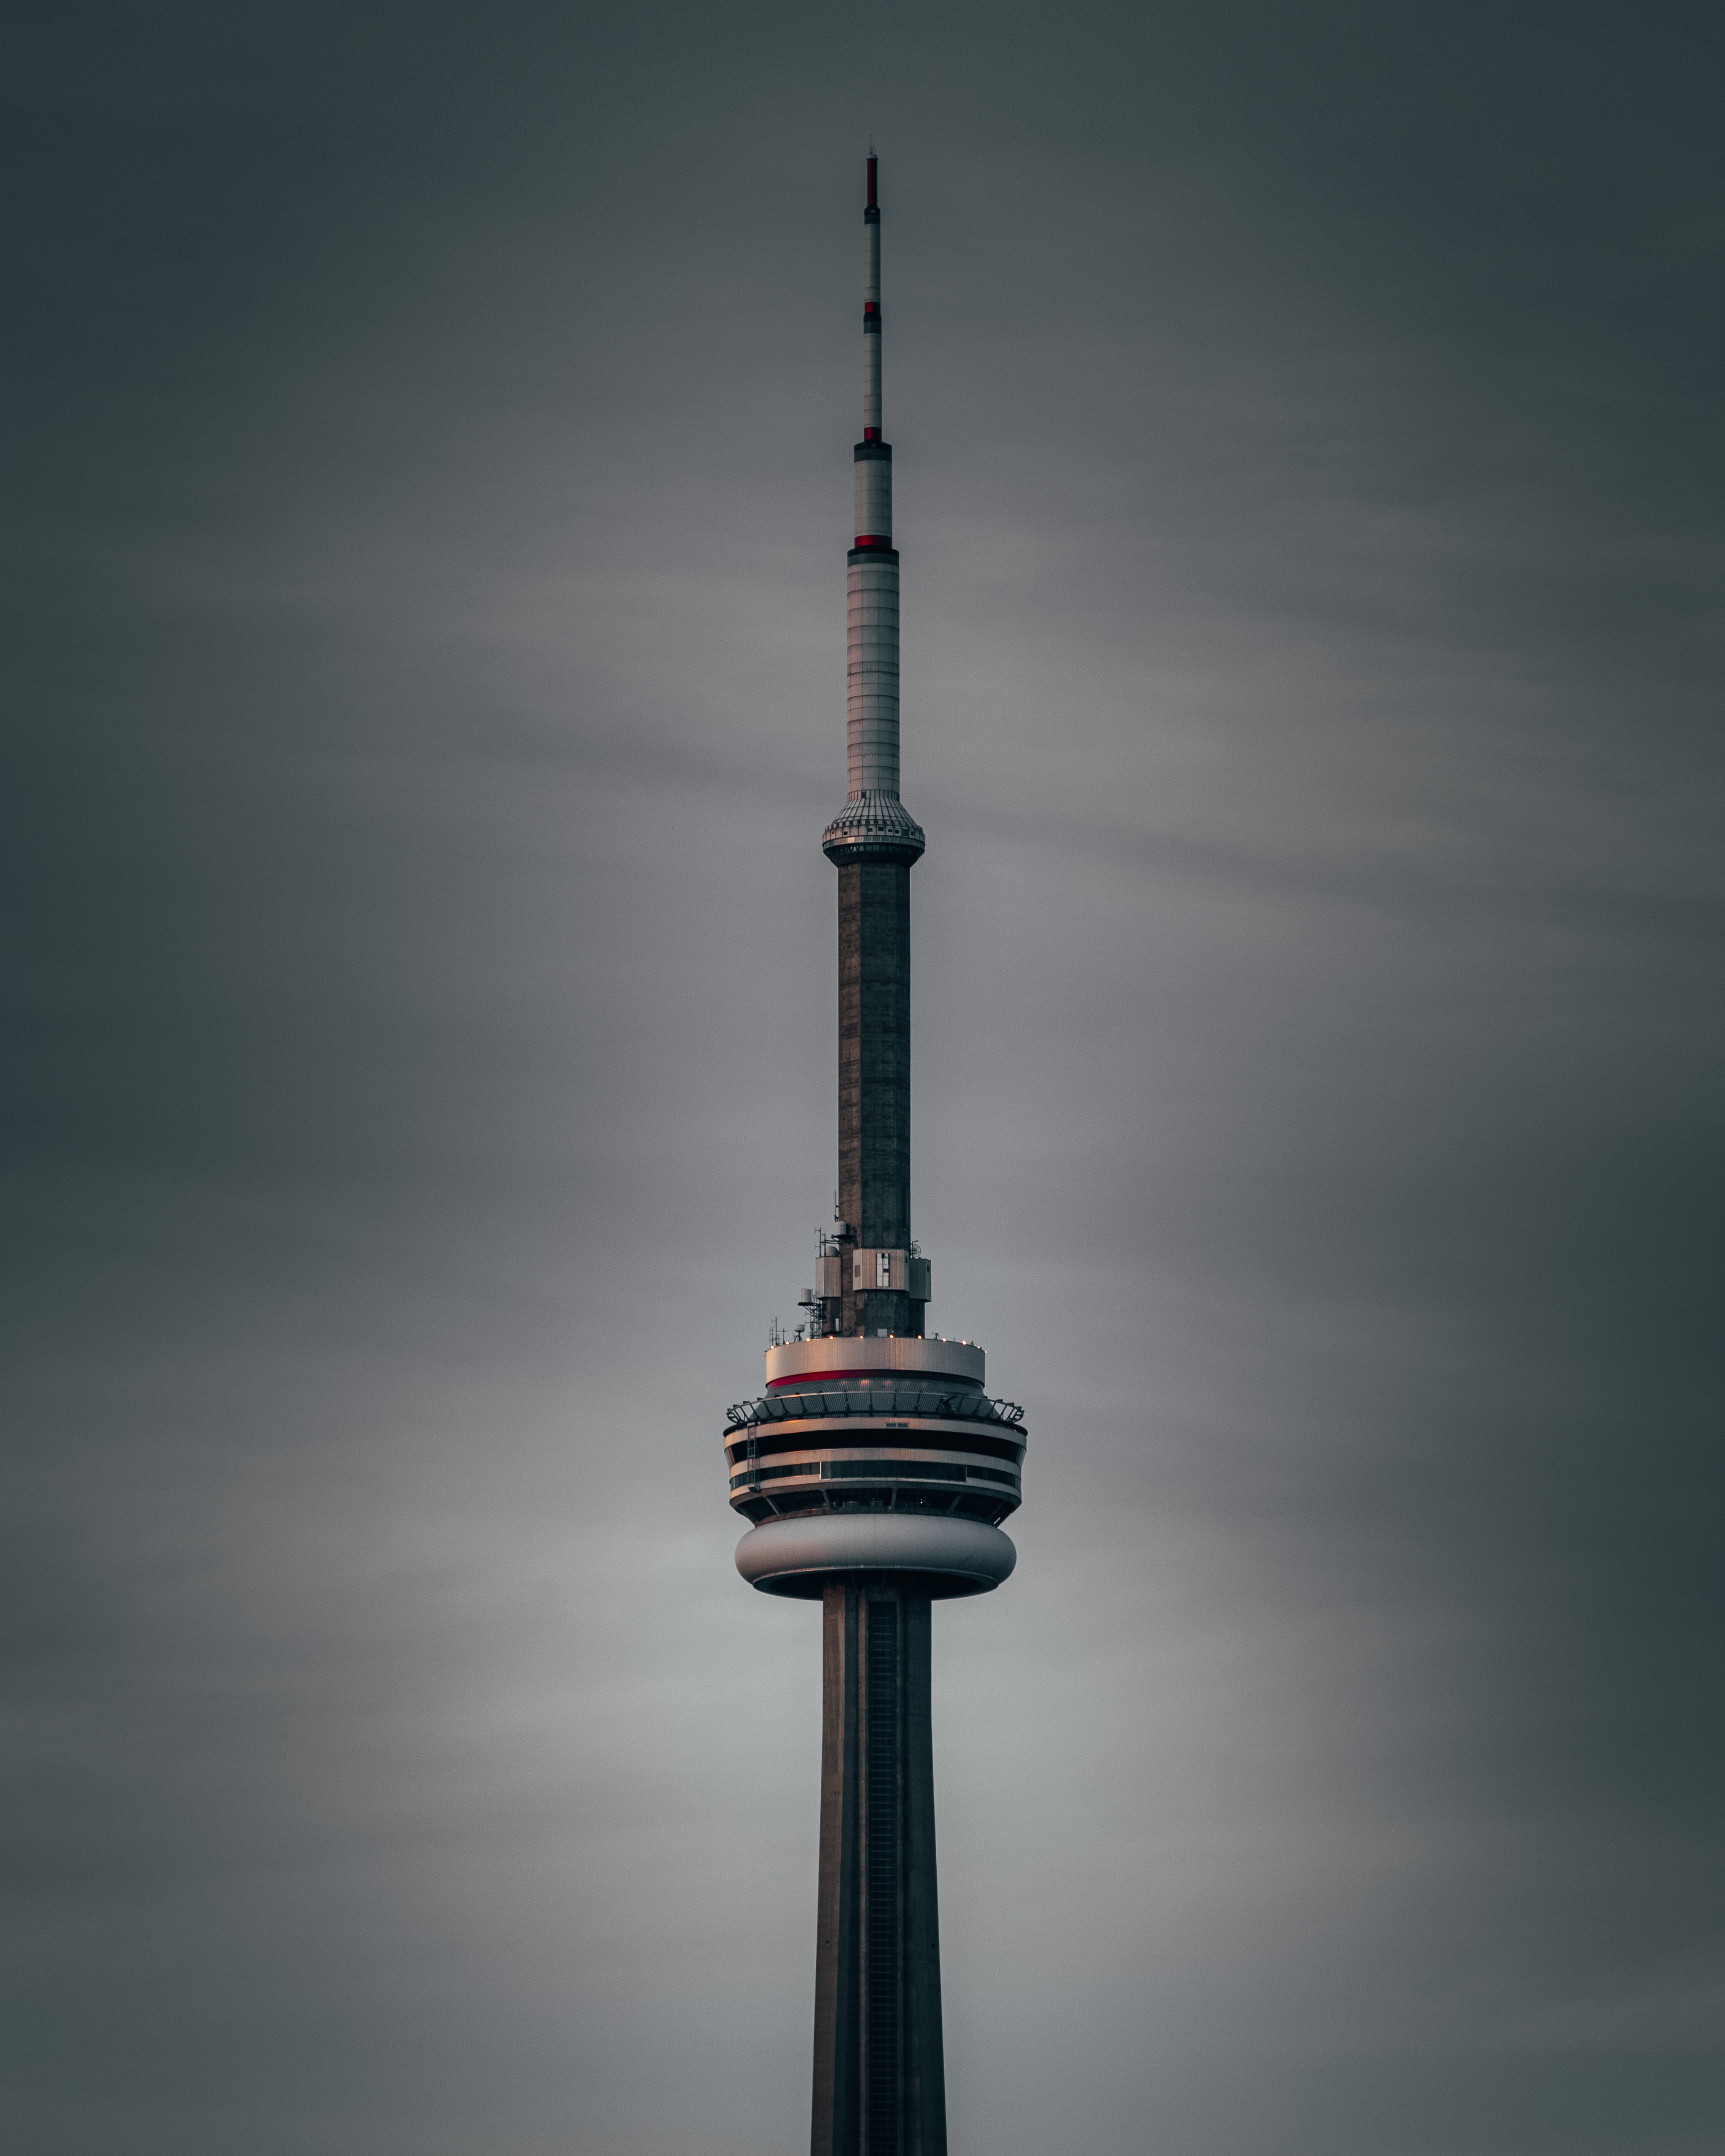 89847 download wallpaper architecture, building, canada, miscellanea, miscellaneous, tower, modern, up to date, toronto screensavers and pictures for free